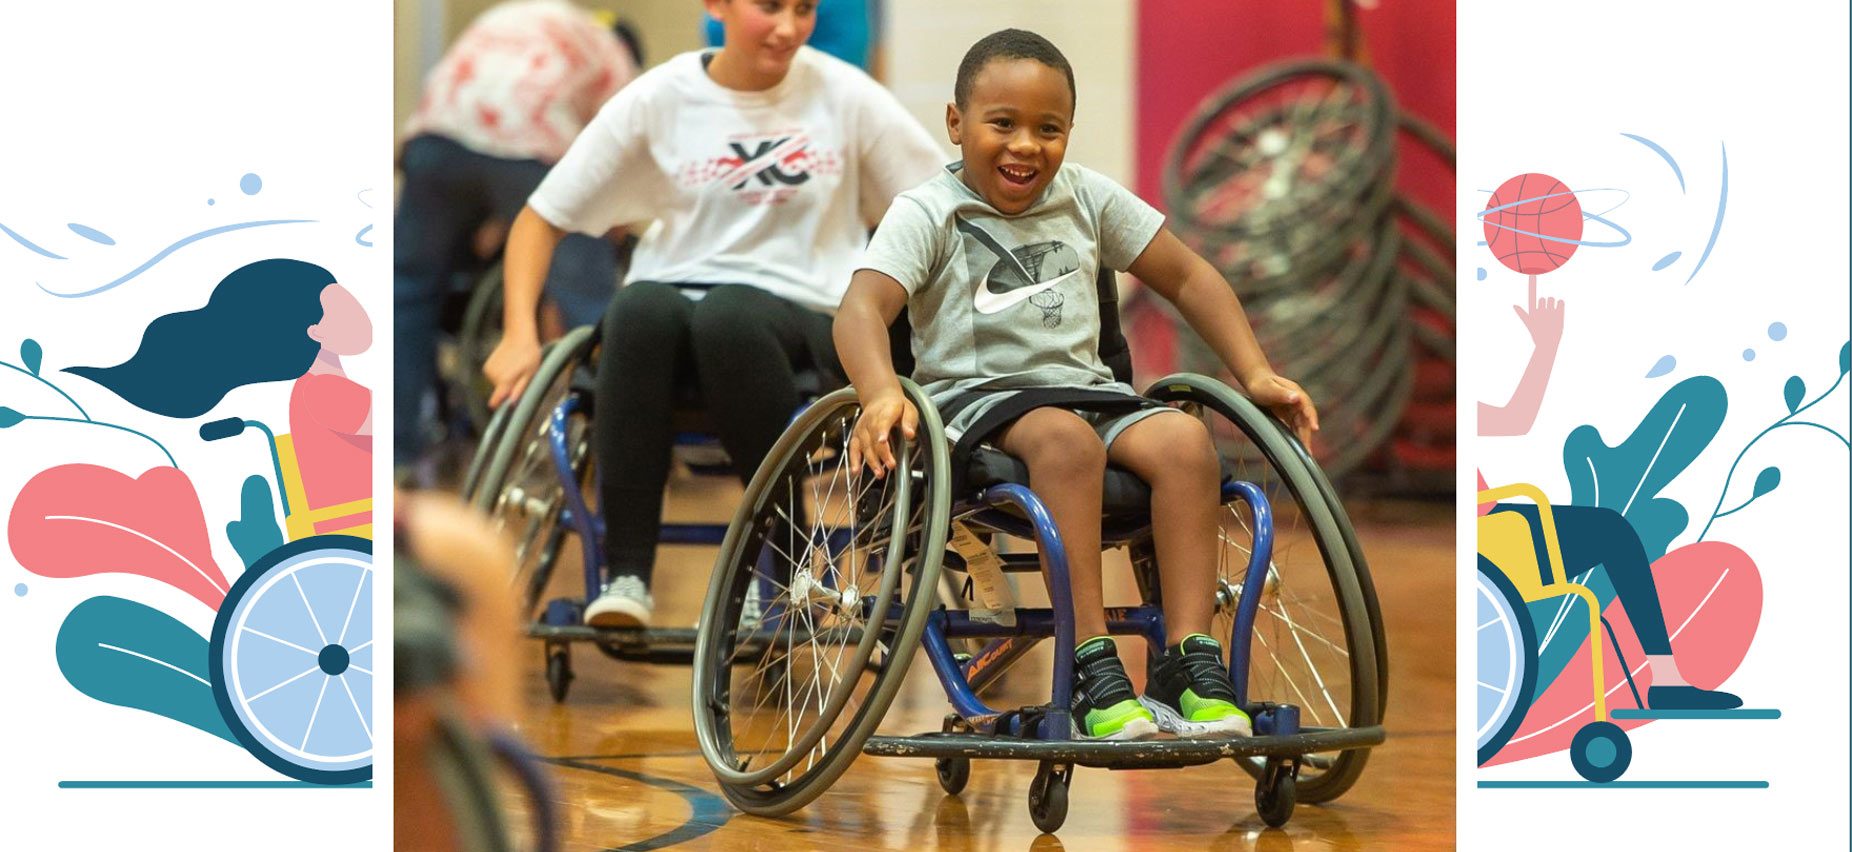 Come Out and Play: Move Along offers adaptive sports for youth